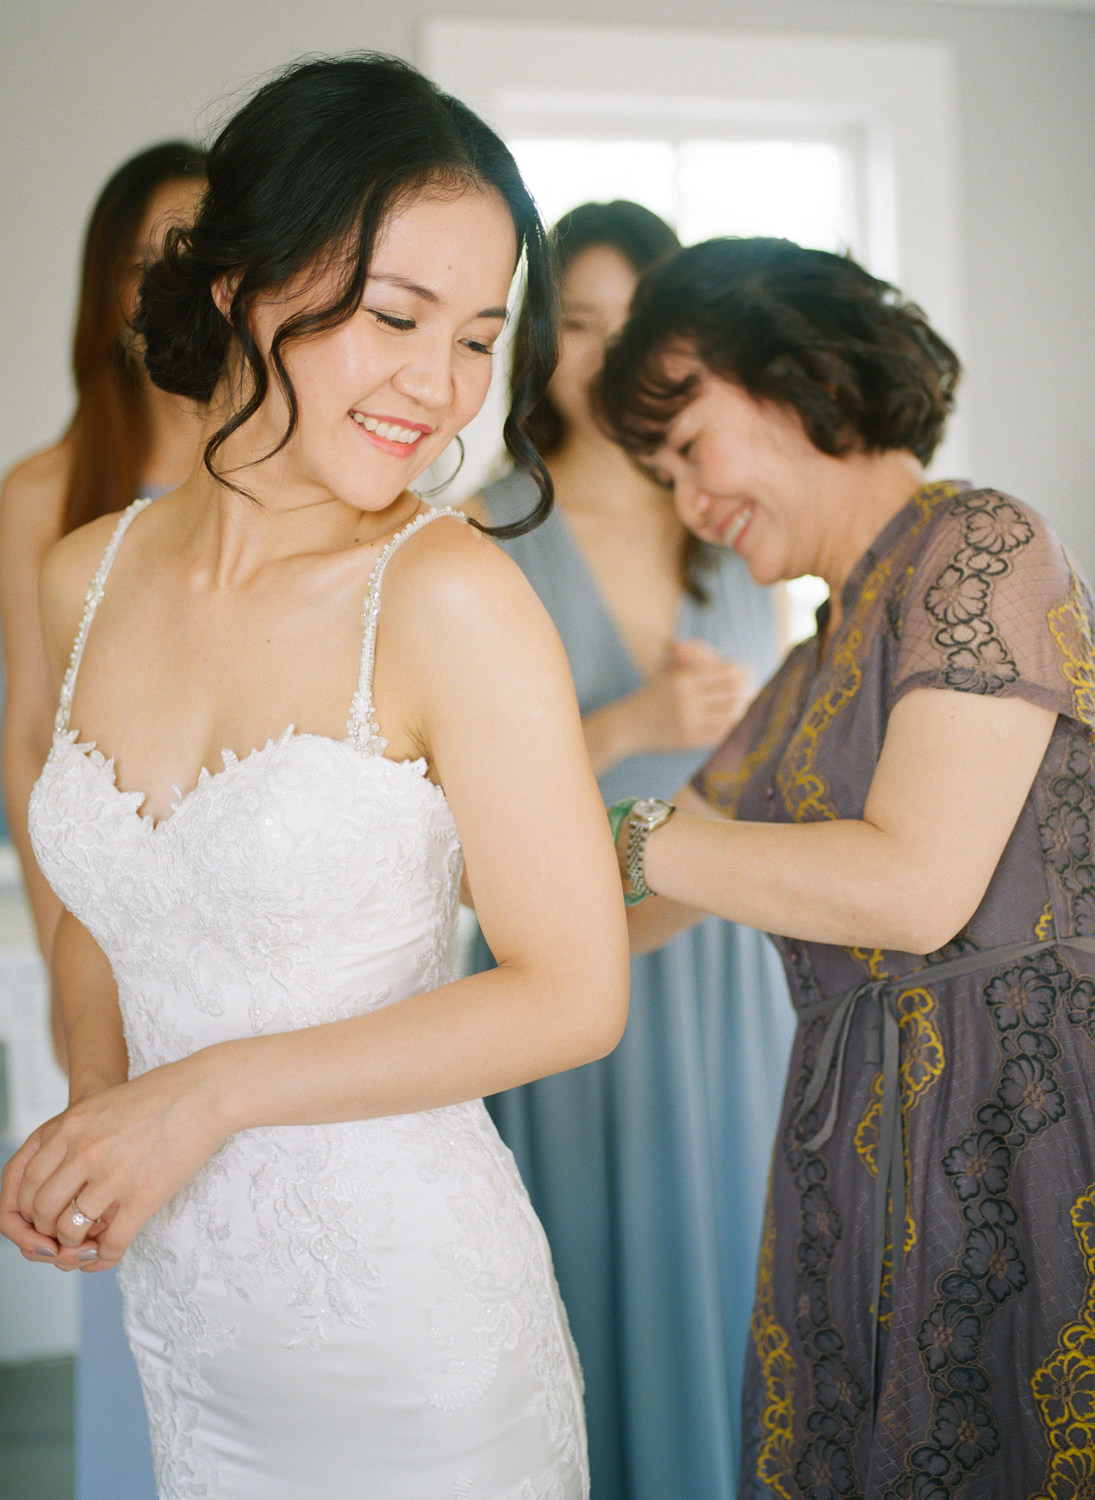 Bride getting ready with mother; St. Louis fine art film wedding photographer Erica Robnett Photography